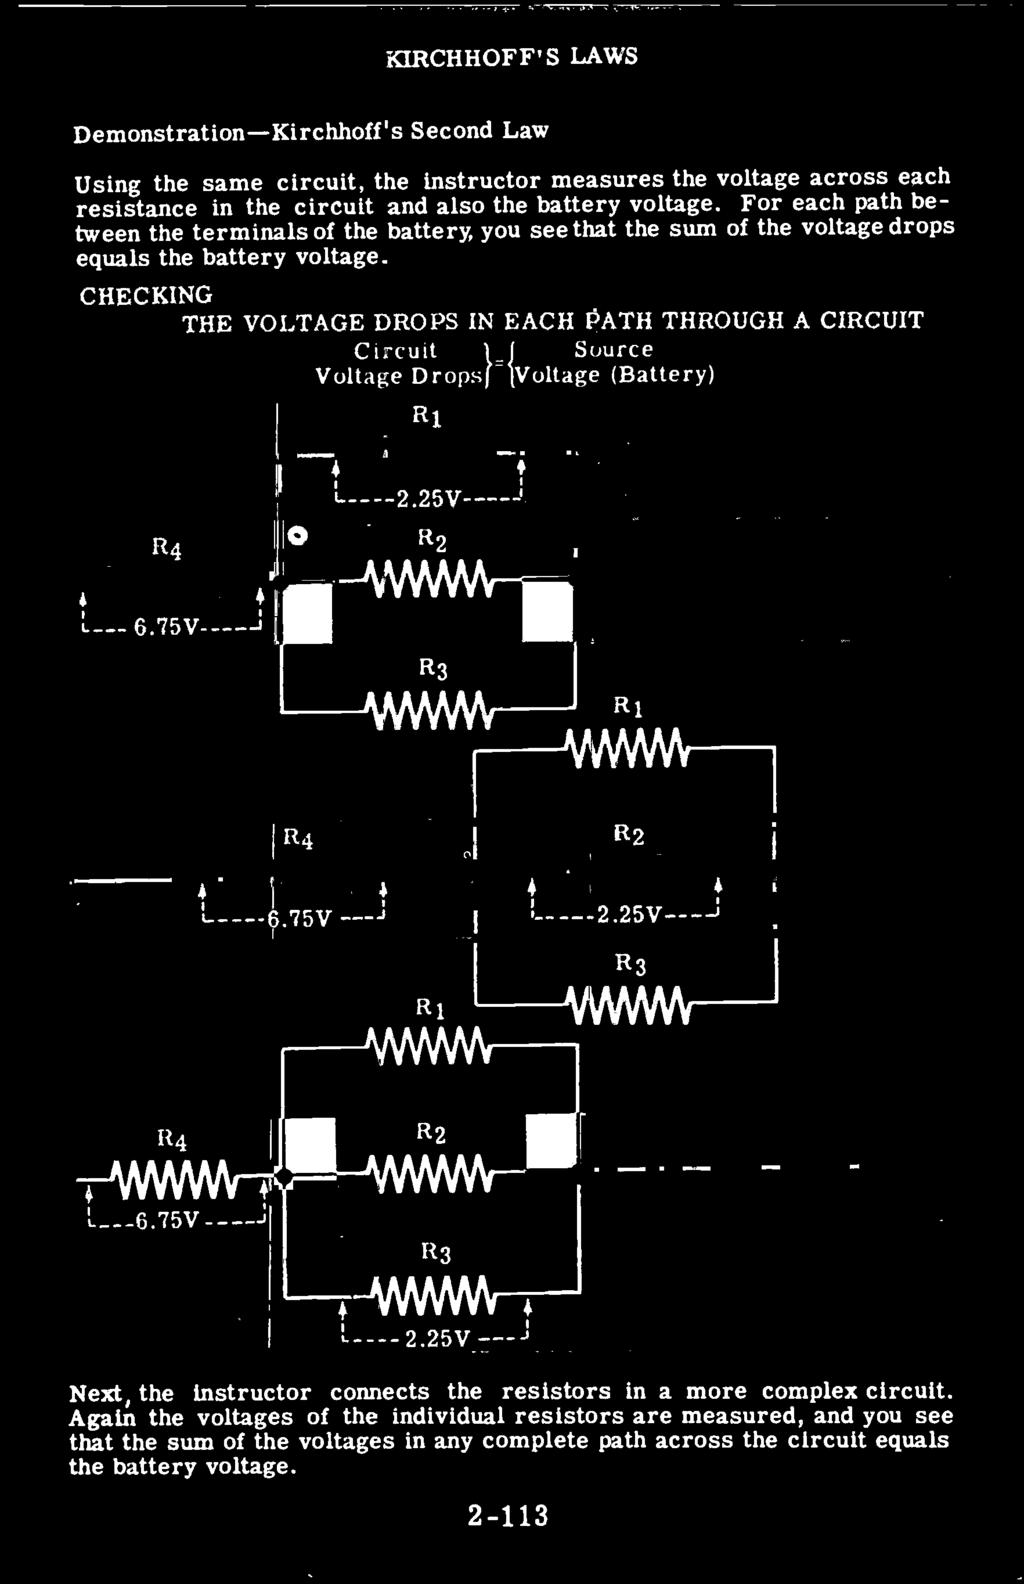 CHECKING THE VOLTAGE DROPS IN EACH PATH THROUGH A CIRCUIT Circult j Source Voltage Drops} 1Voltage (Battery)